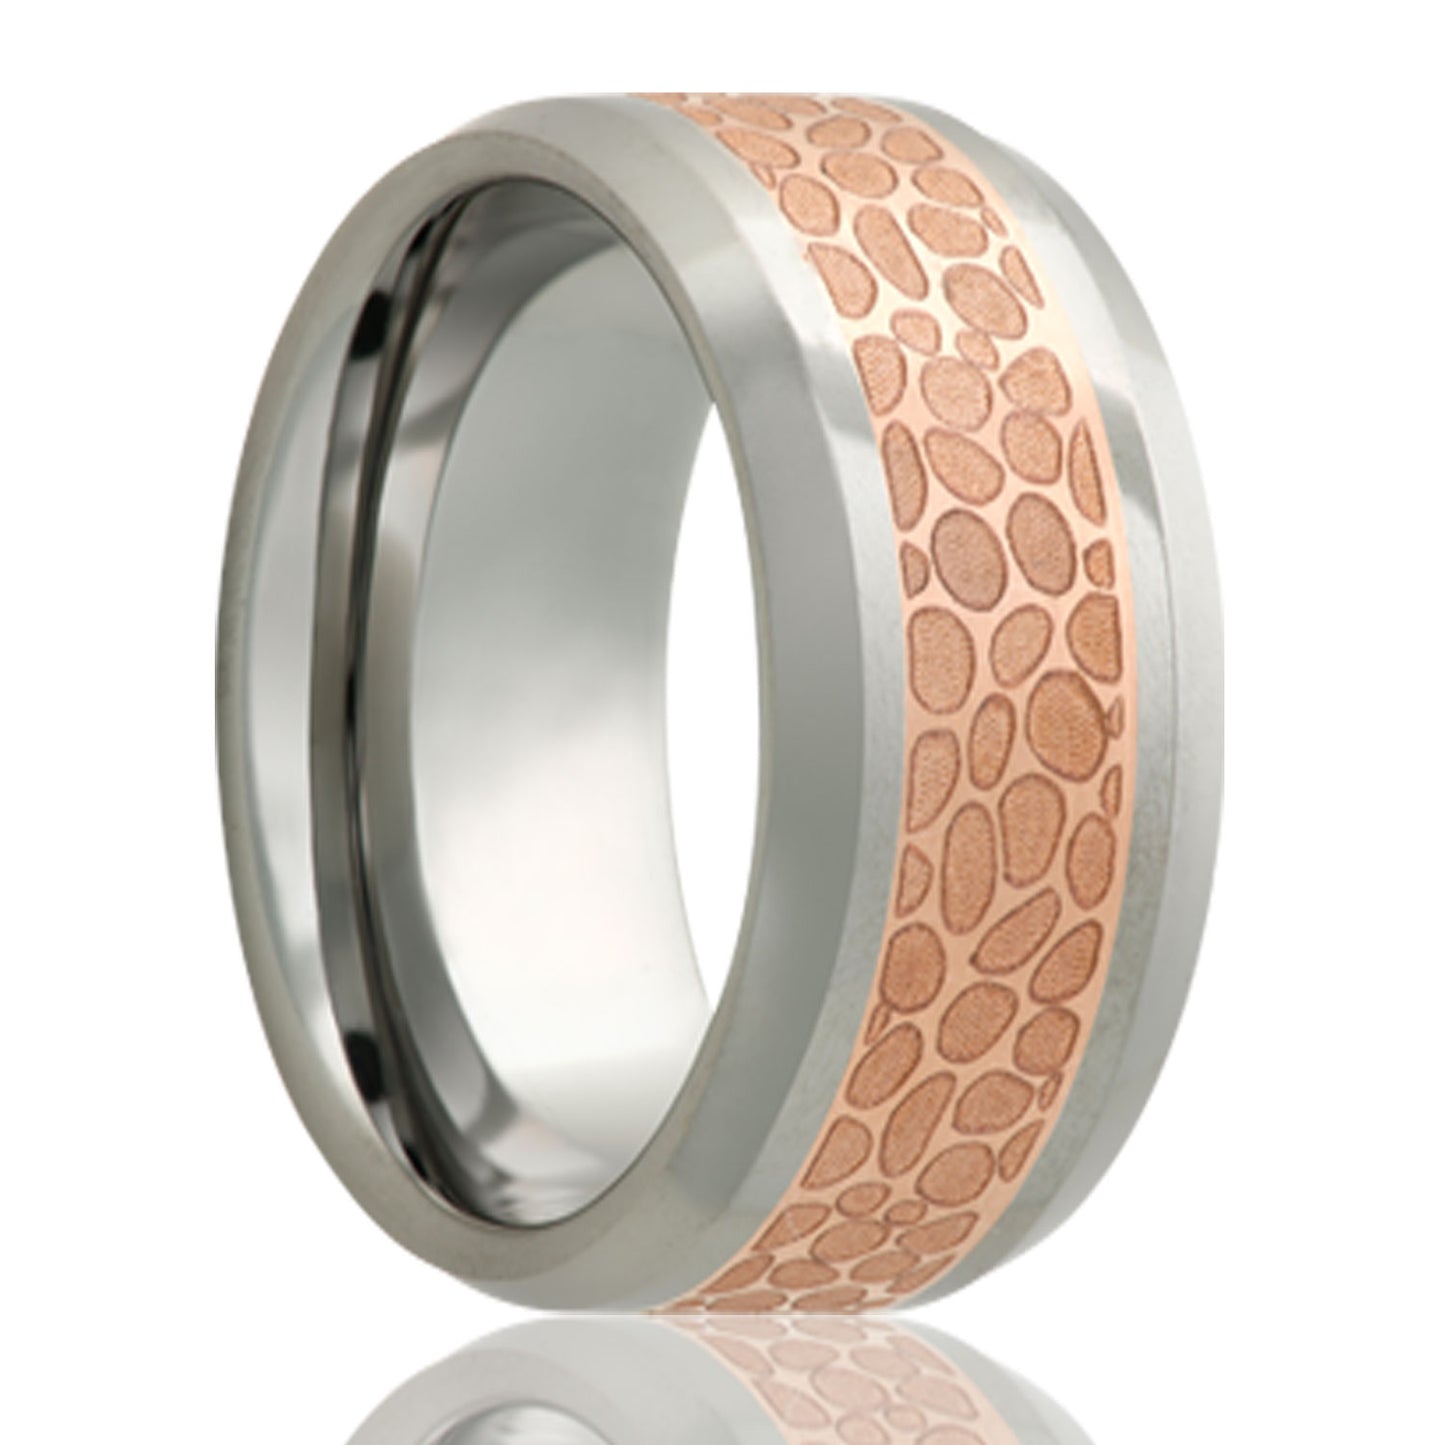 A copper inlay tungsten men's wedding band with beveled edges displayed on a neutral white background.